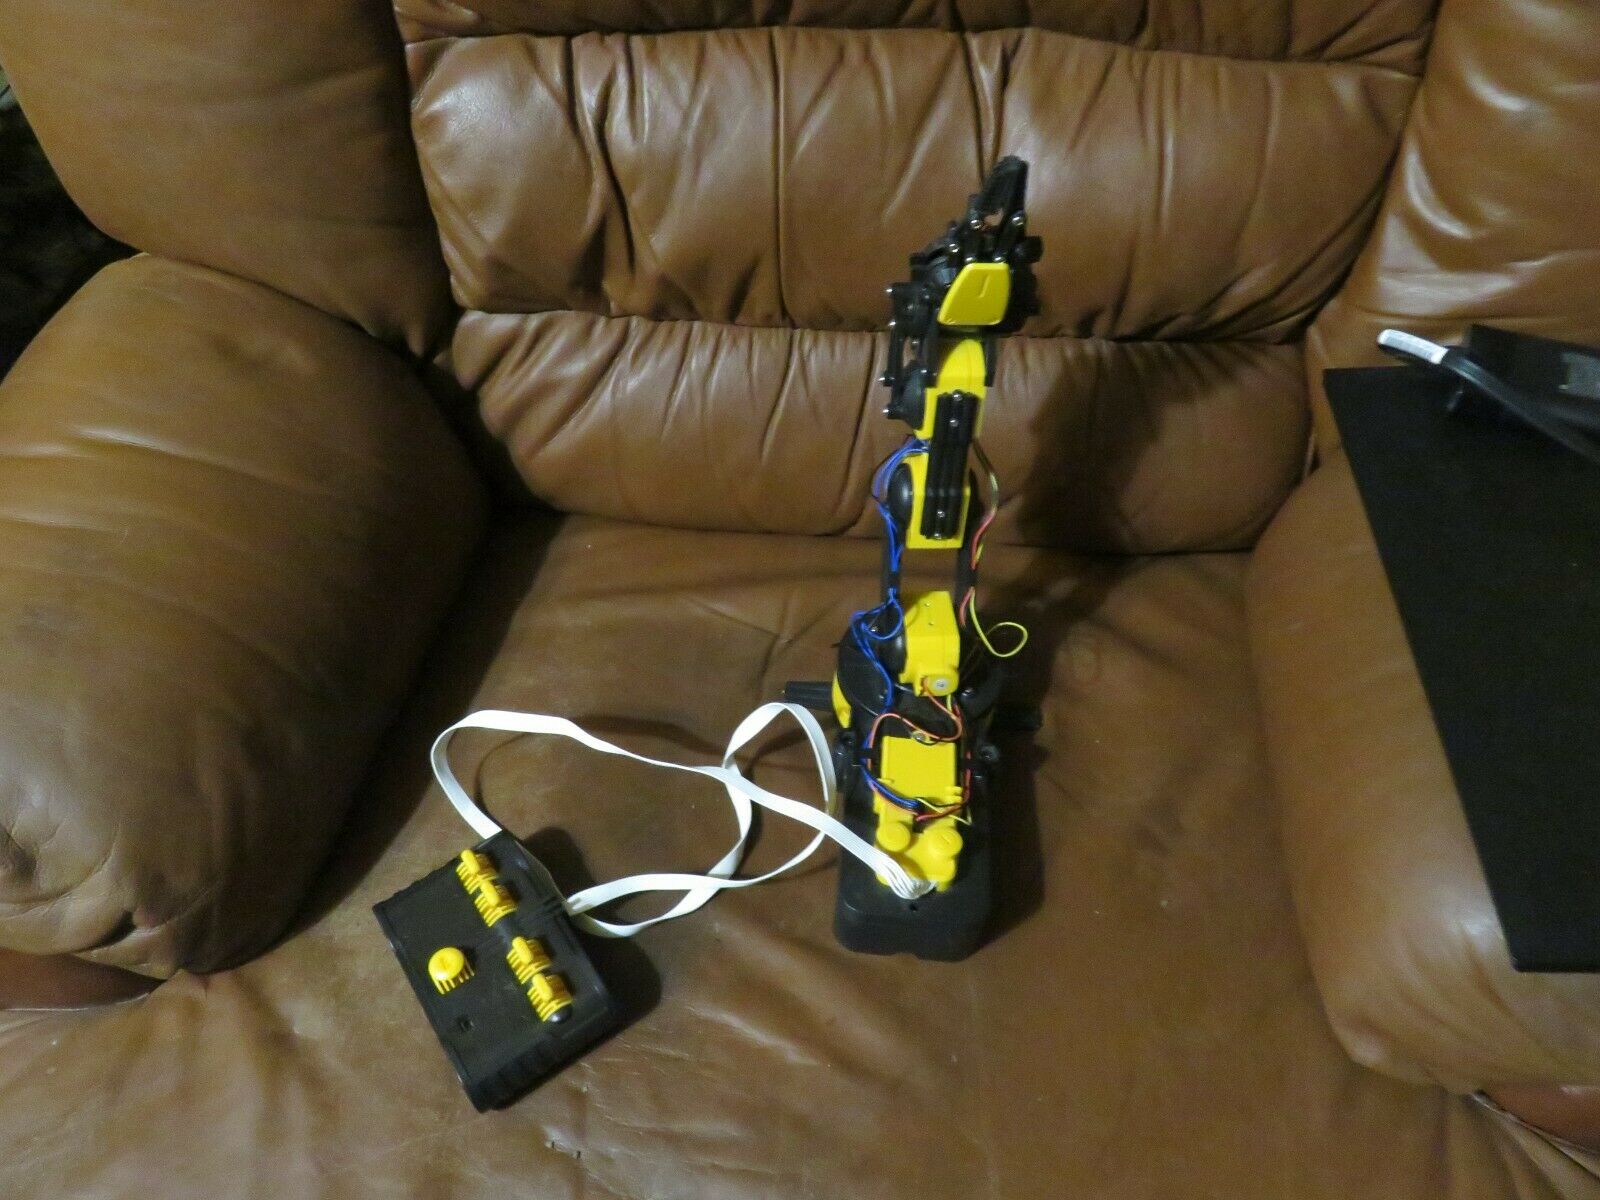 Owi Robotic Arm Already Assembled, Fully Functional Mechanical